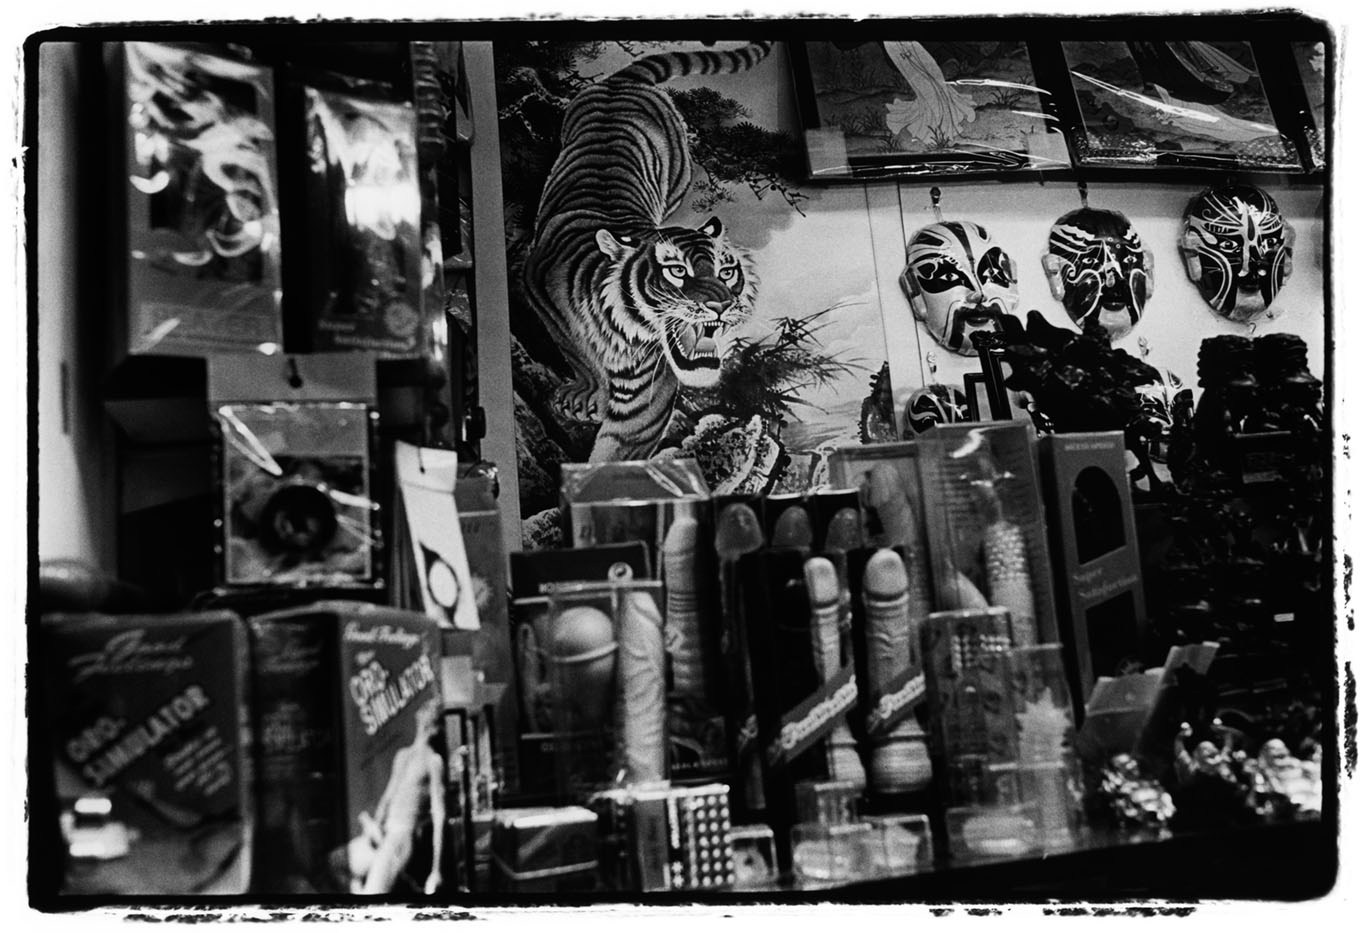 ChinaHong KongSex toys and Chinese masks for sale in a shop on a Hong Kong market. The image of the tiger in the background is a symbol of strength and fertility. 2008